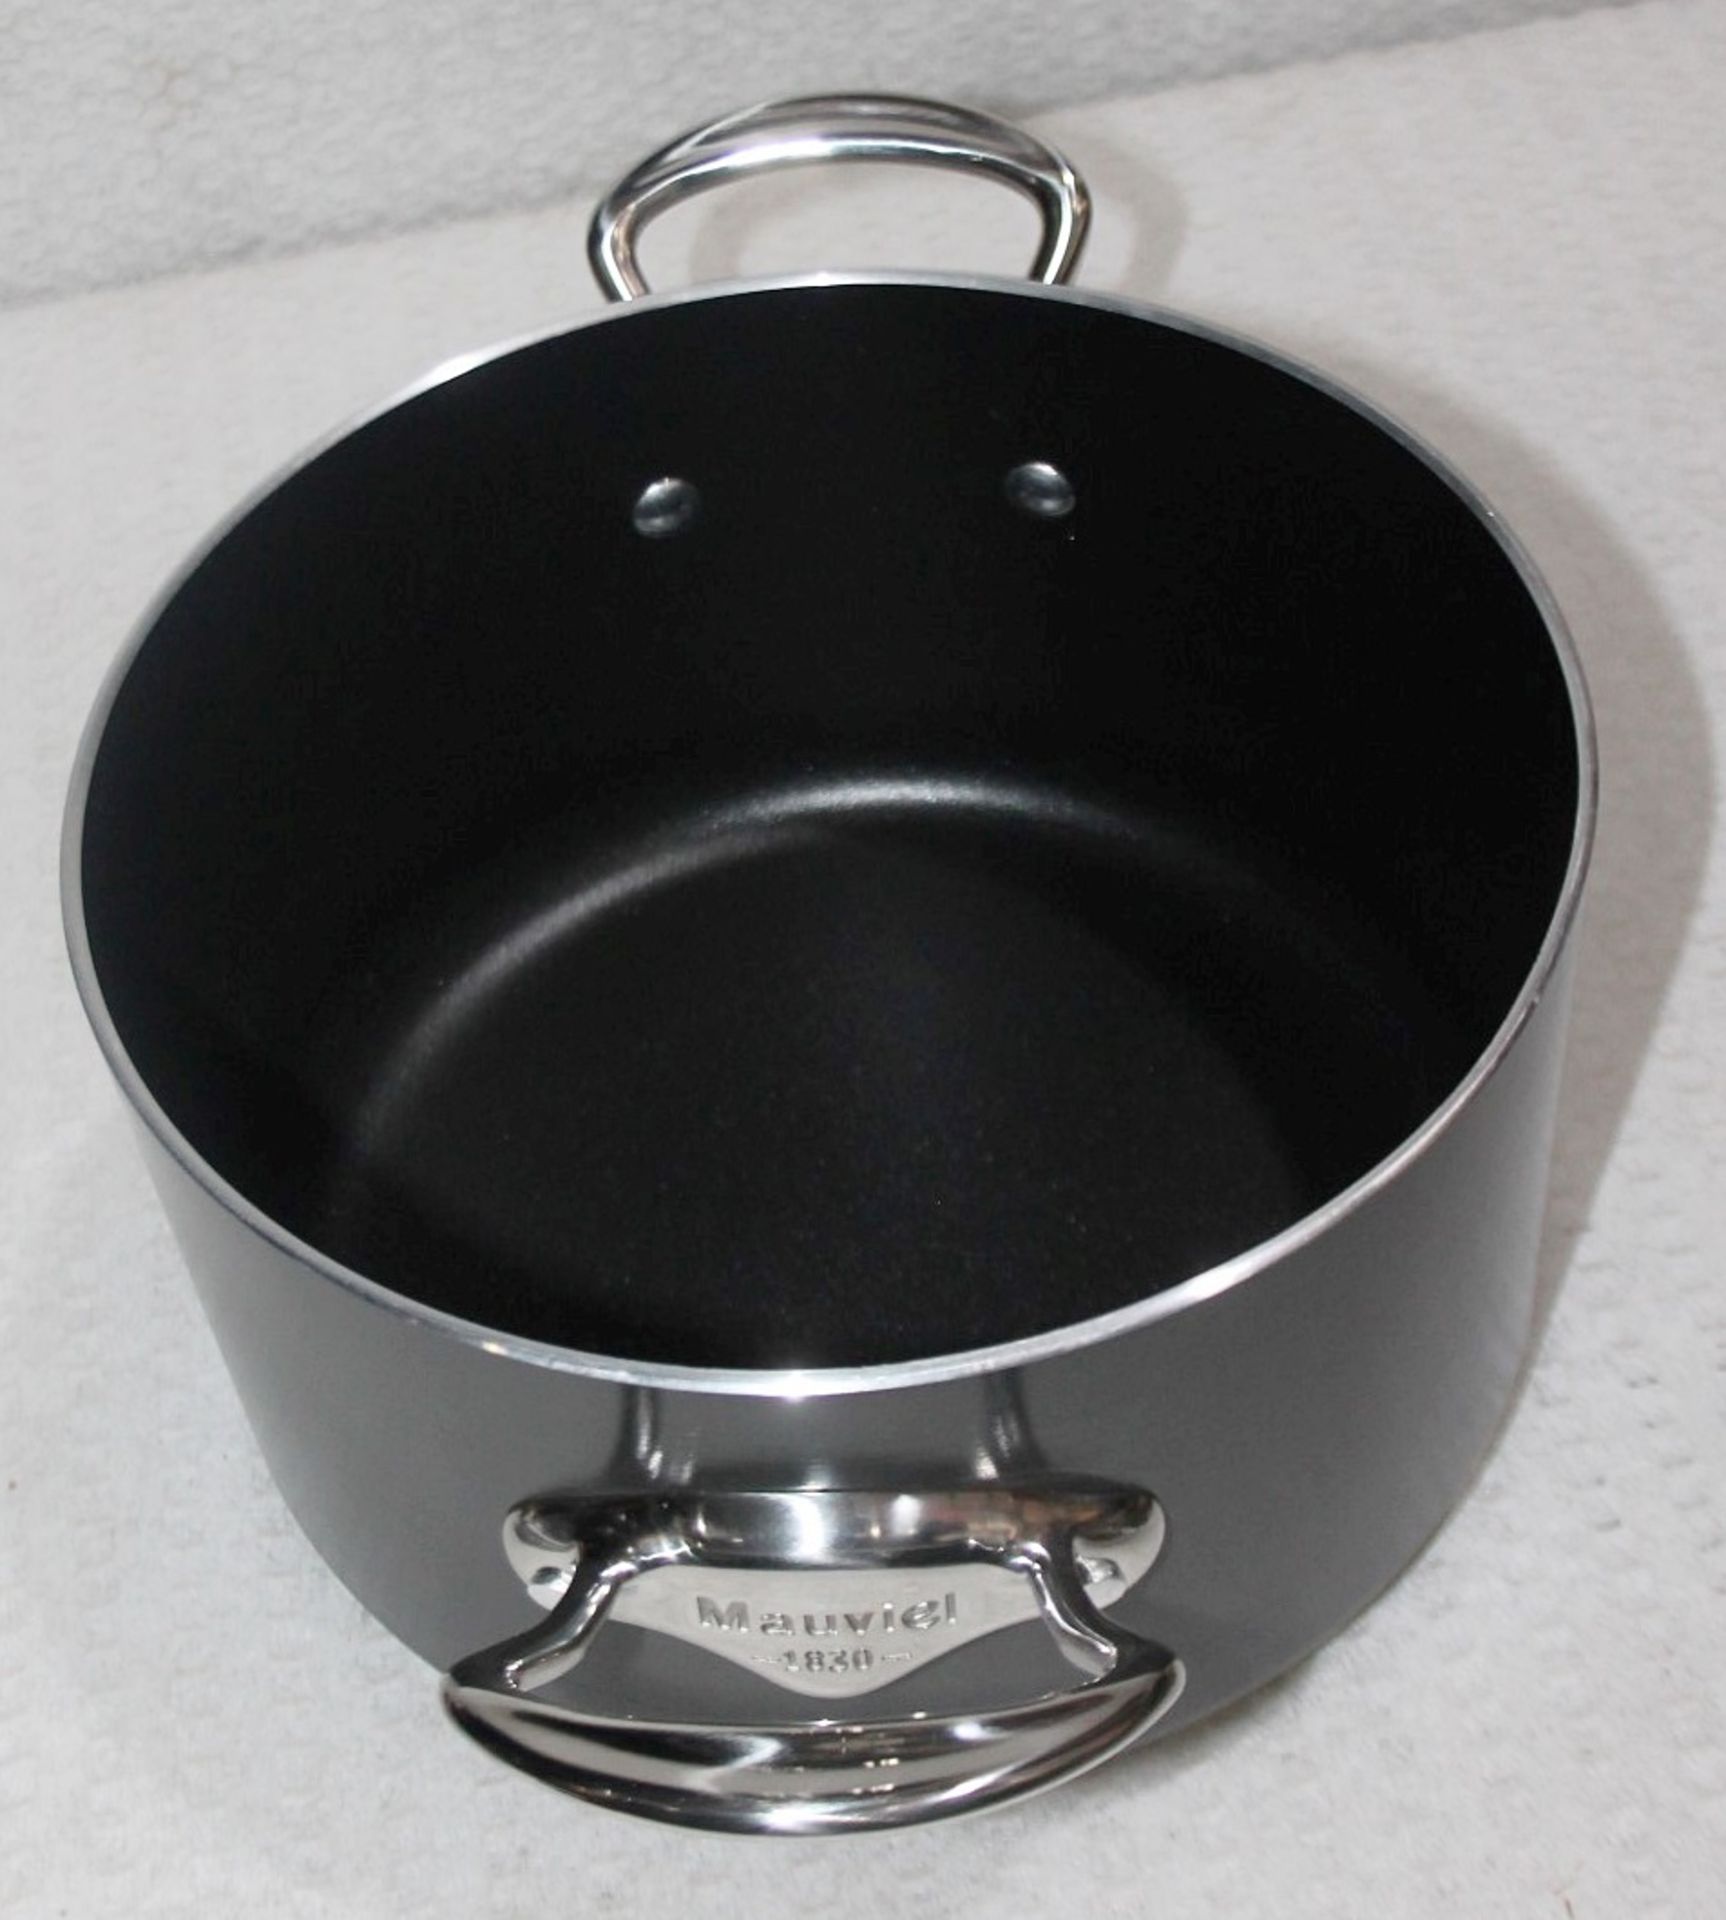 1 x MAUVIEL 'M'Stone' 4-Piece Luxury Cookware Set With Crate - Original Price £599.00 - Unused Boxed - Image 6 of 15